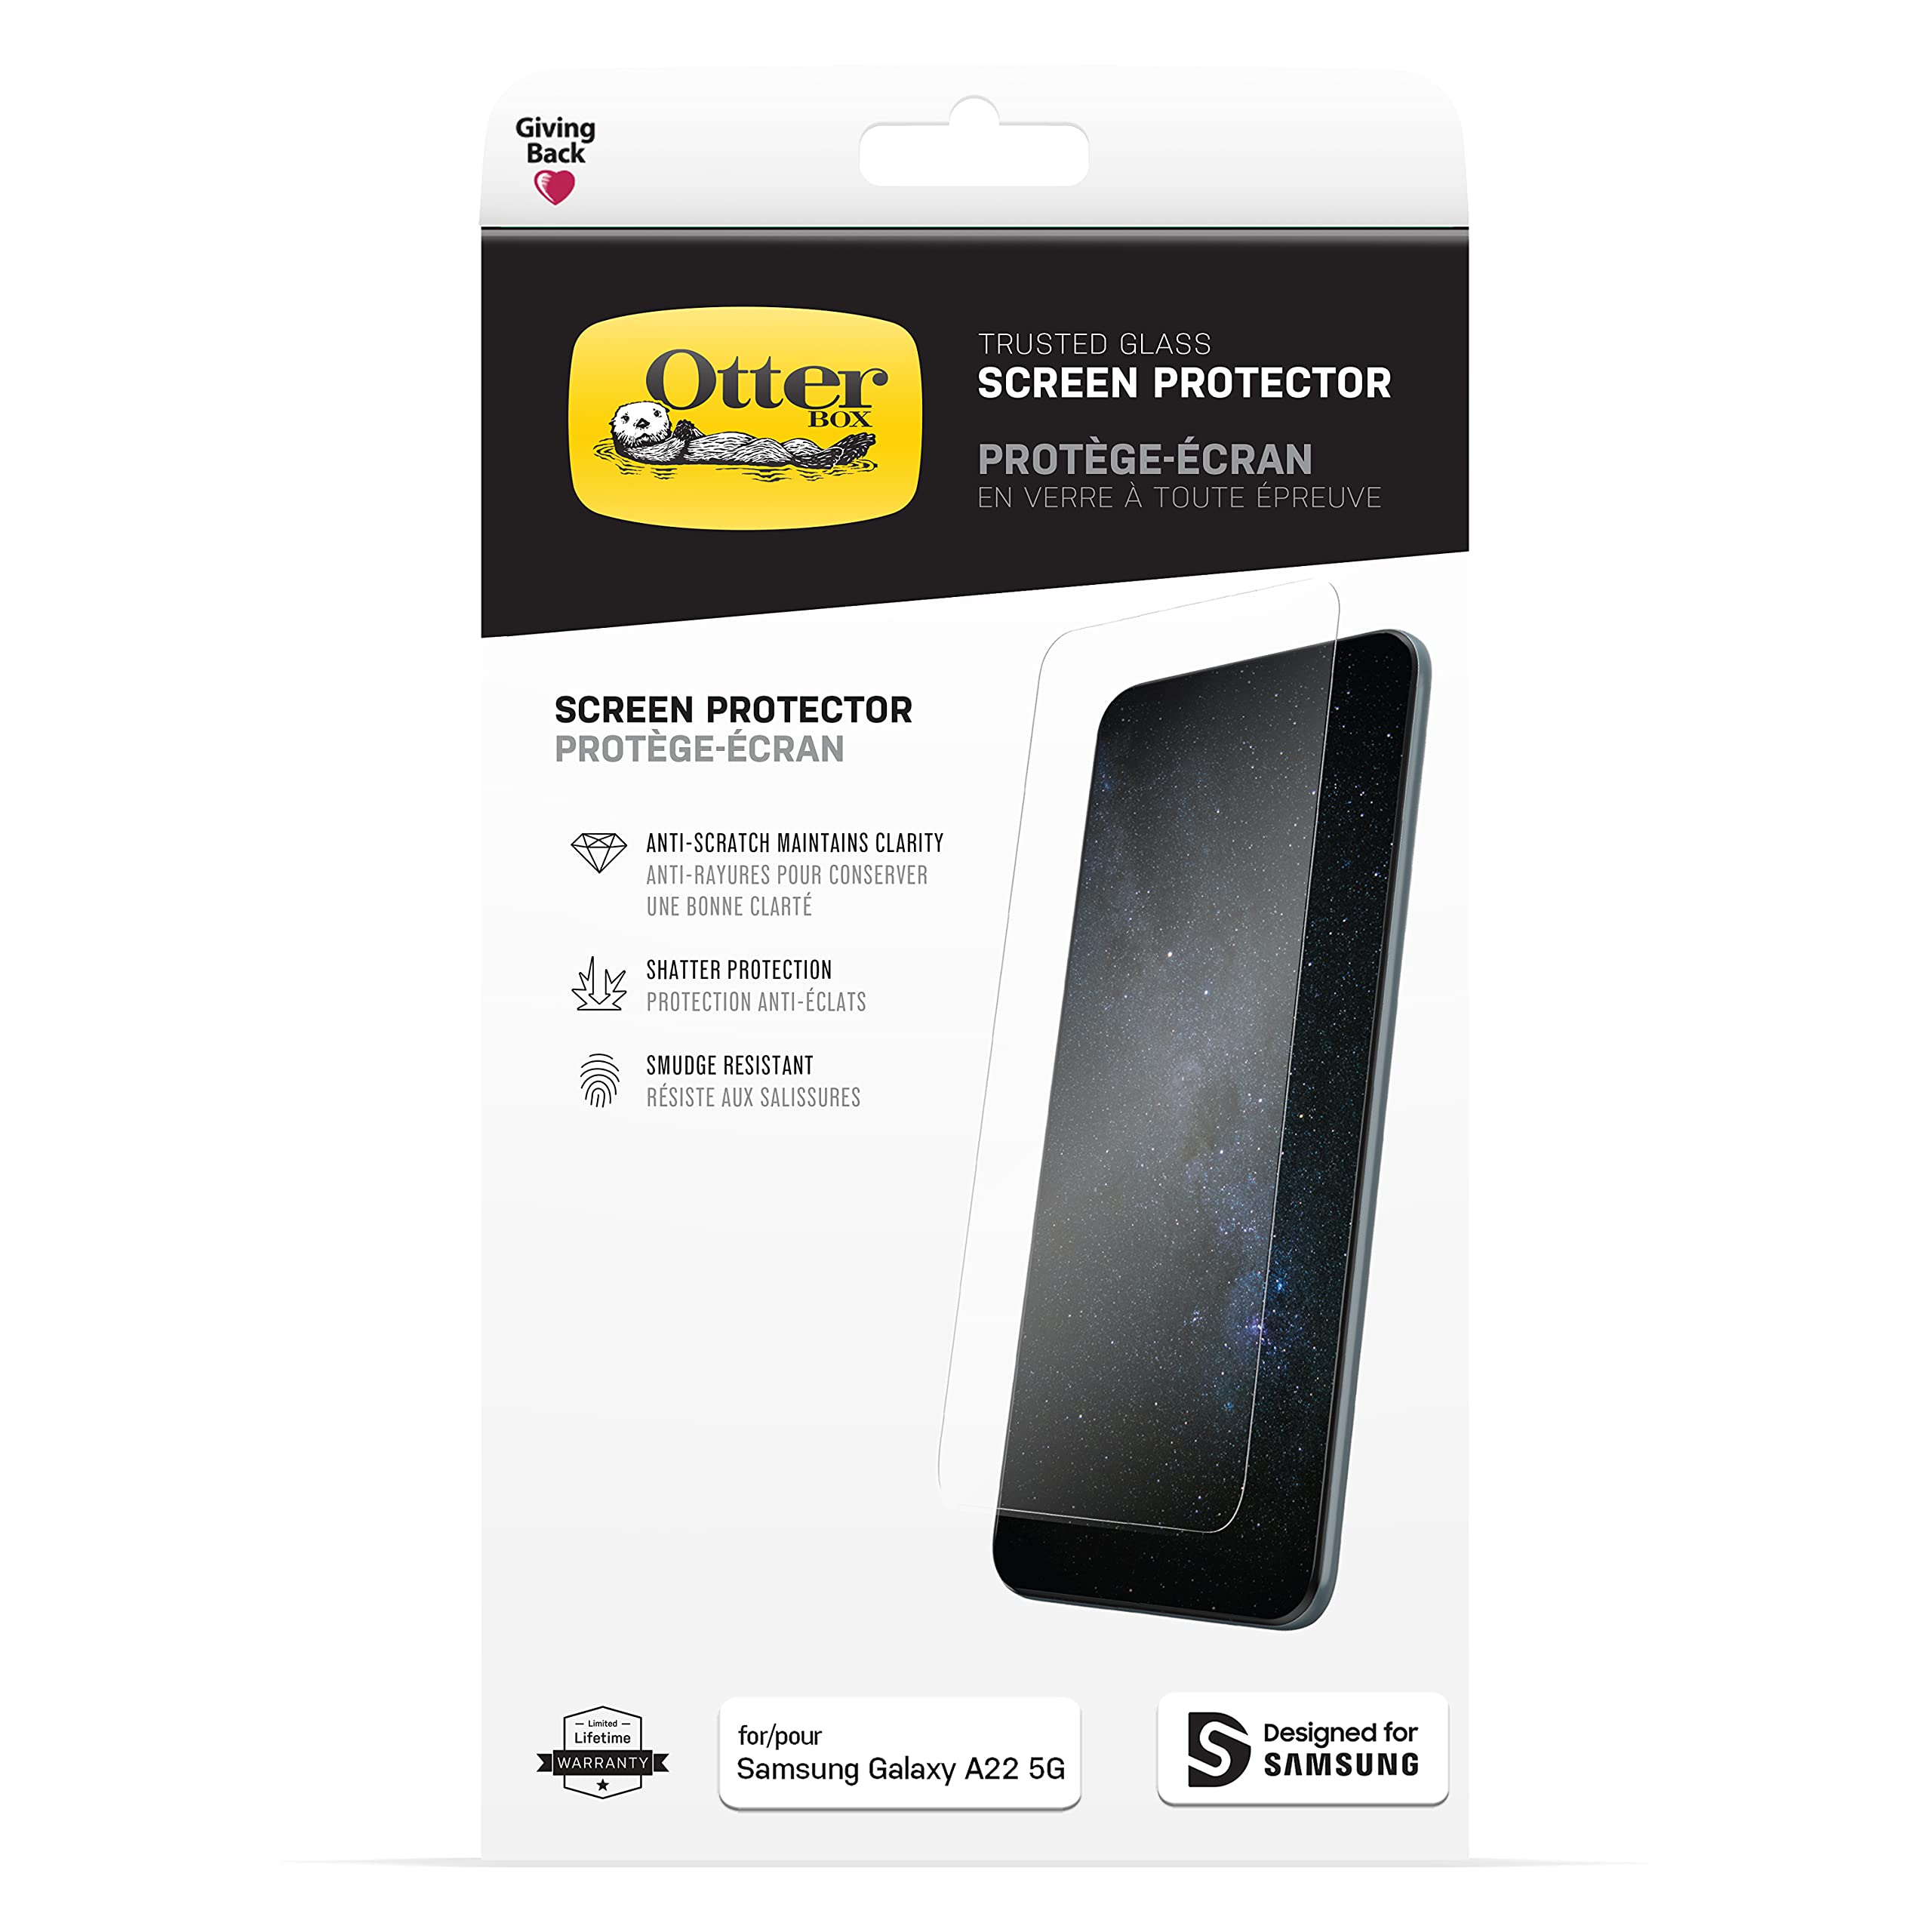 OTTERBOX TRUSTED GLASS SAMSUNG